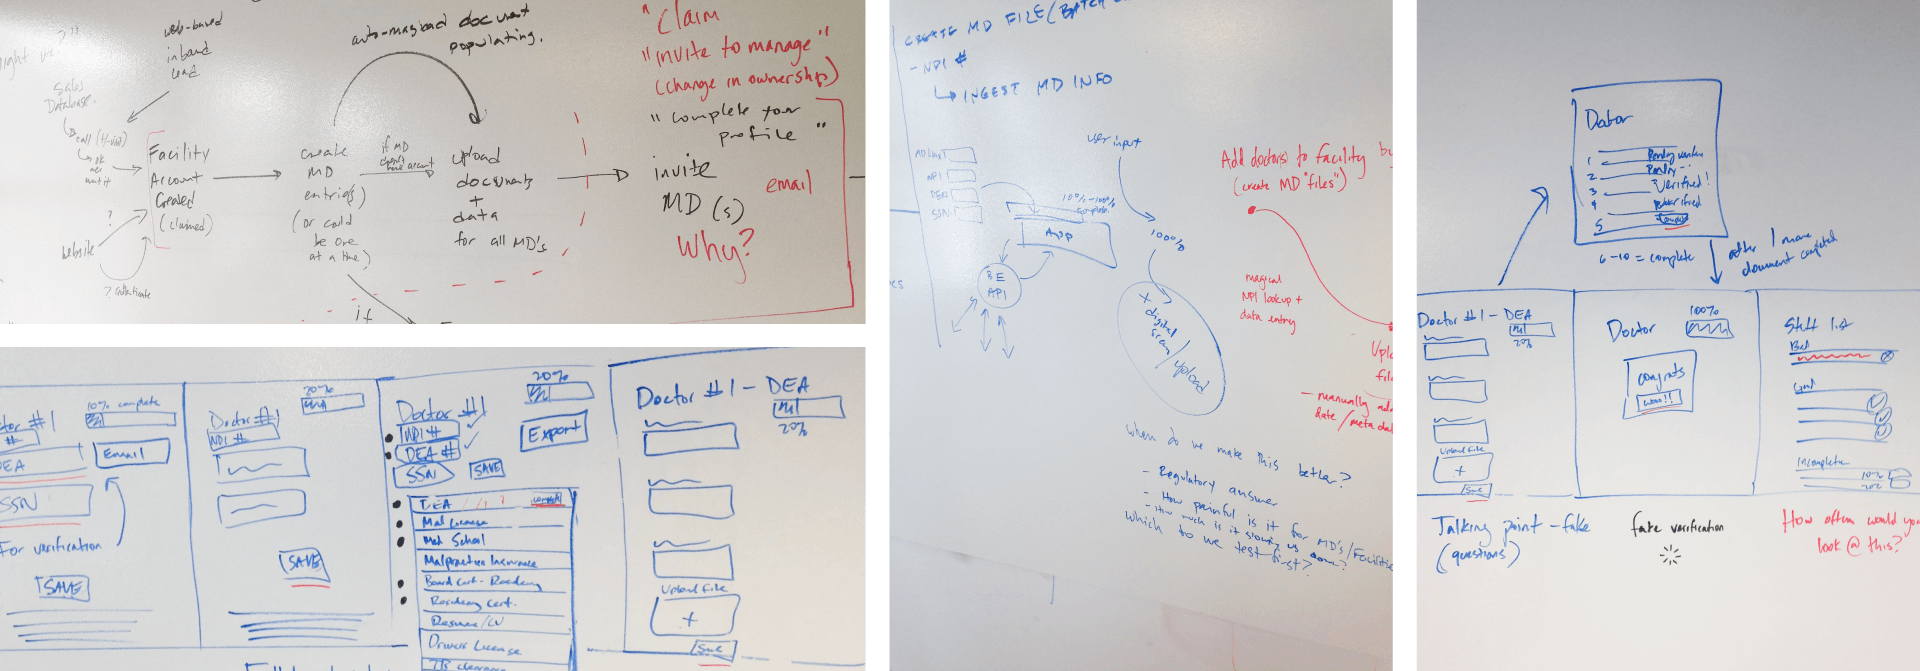 4 images of writing on a whiteboard from the Silversheet design sprint